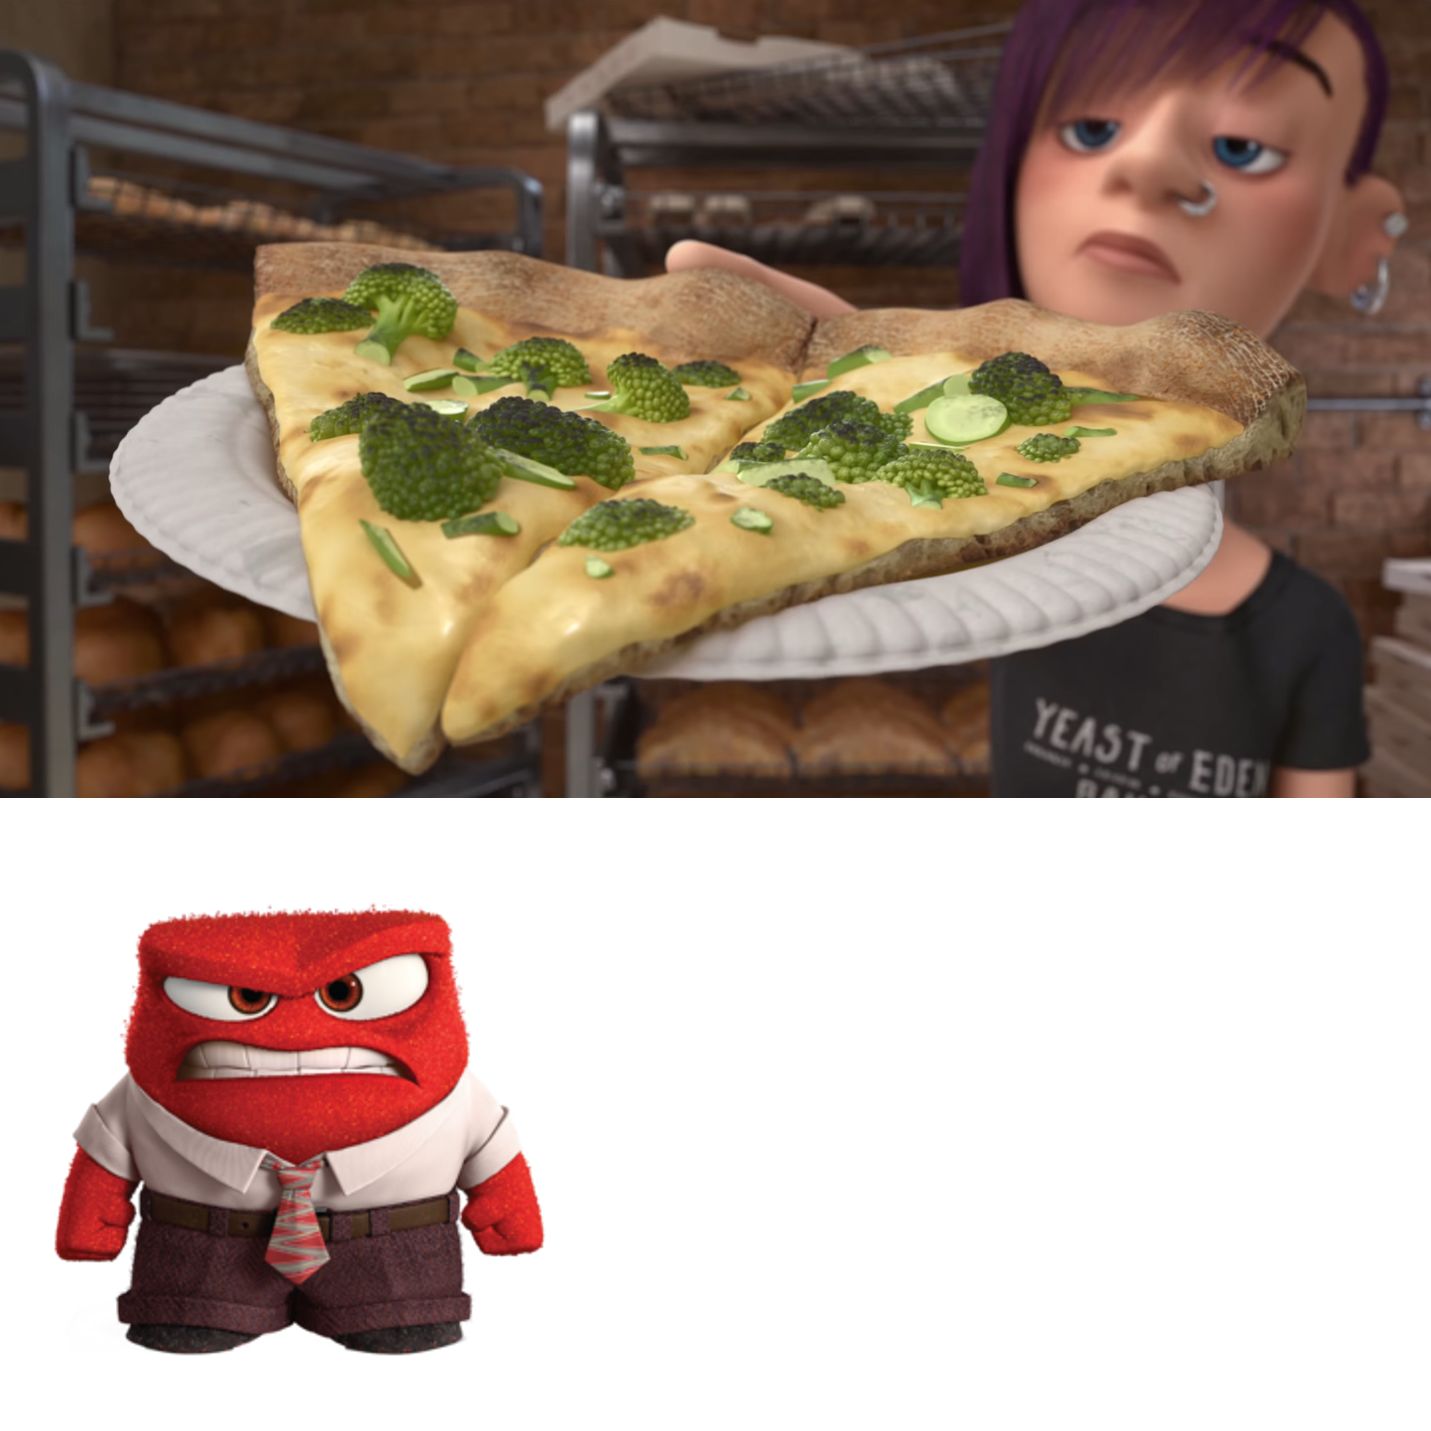 congratulations you ruined inside out broccoli pizza anger Blank Meme Template